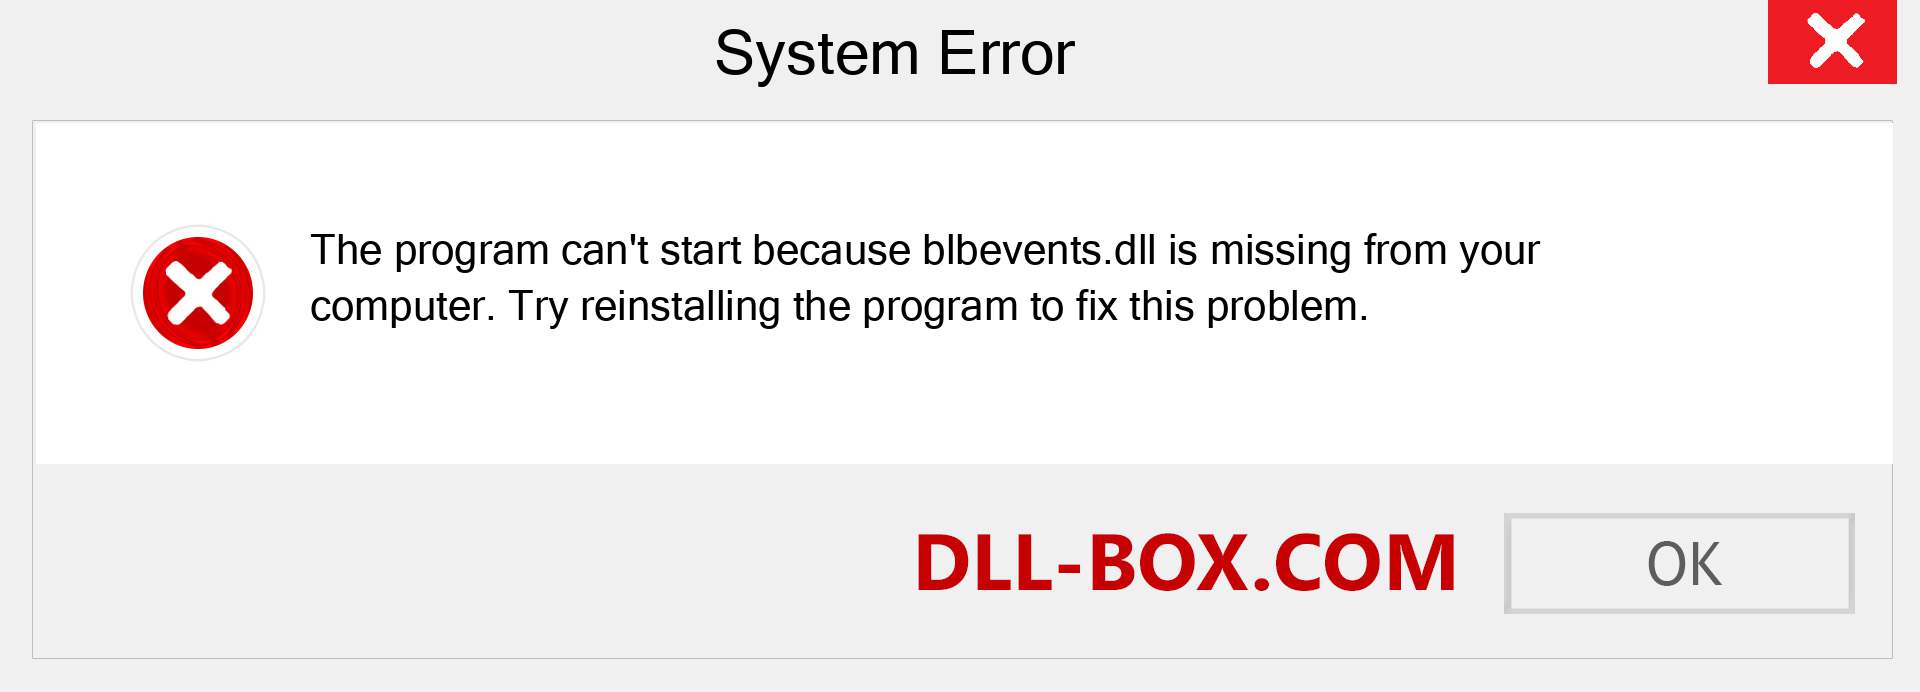  blbevents.dll file is missing?. Download for Windows 7, 8, 10 - Fix  blbevents dll Missing Error on Windows, photos, images